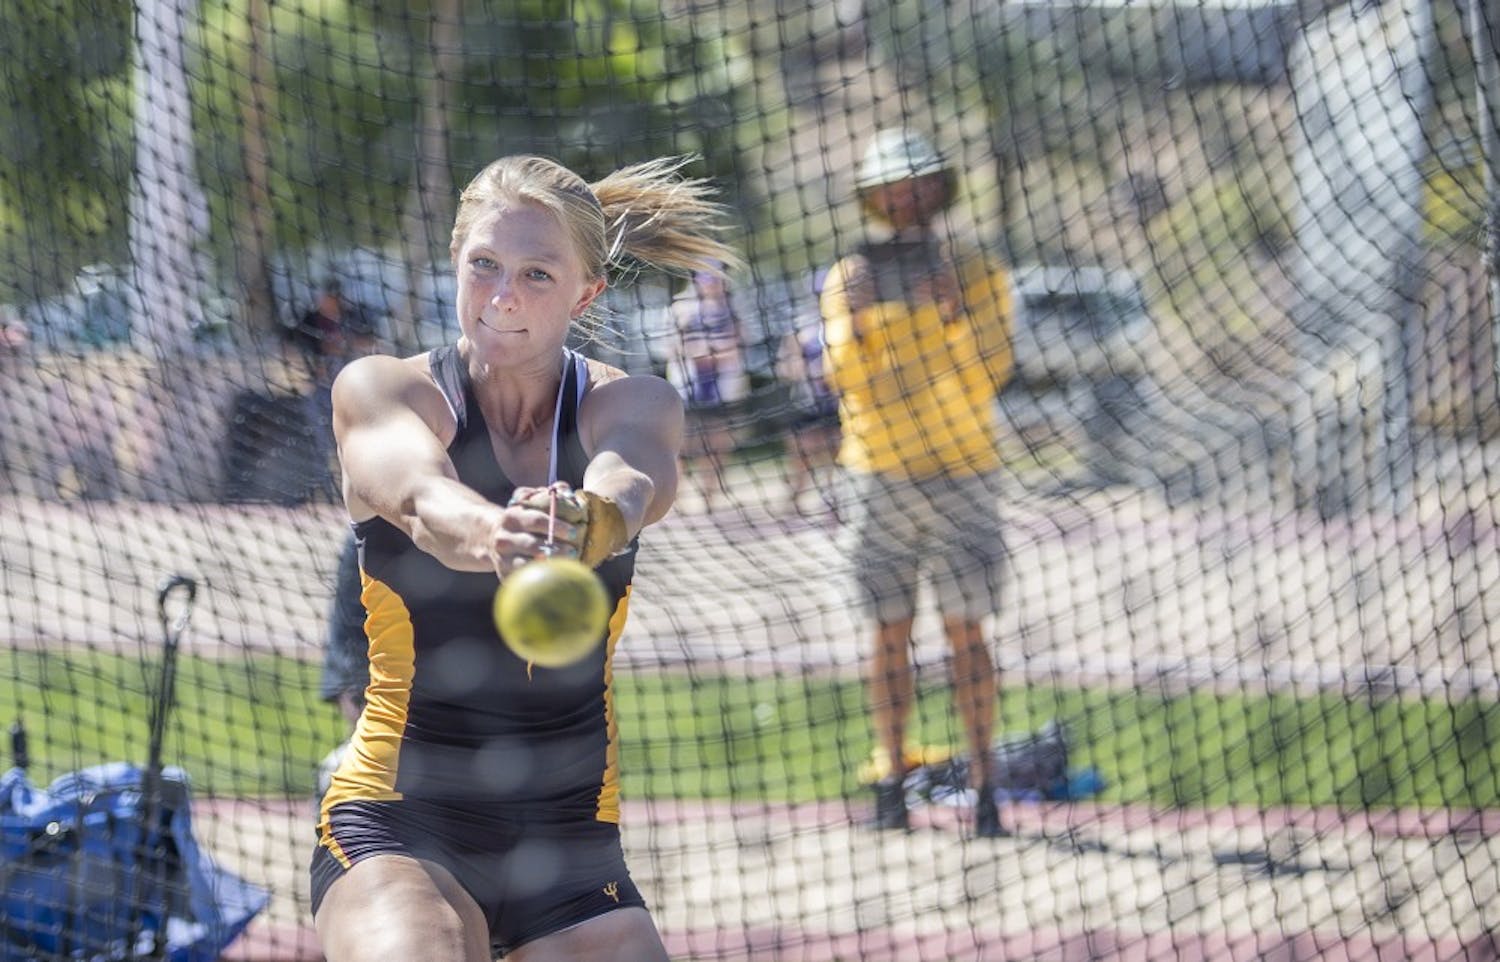 ASU's Maggie Ewan winds up in the second flight of the women's hammer throw during the first day of the 2016 Pac-12/Big Ten Invitational track meet at Sun Angel Stadium in Tempe, Arizona, on Friday, March 25, 2016. 